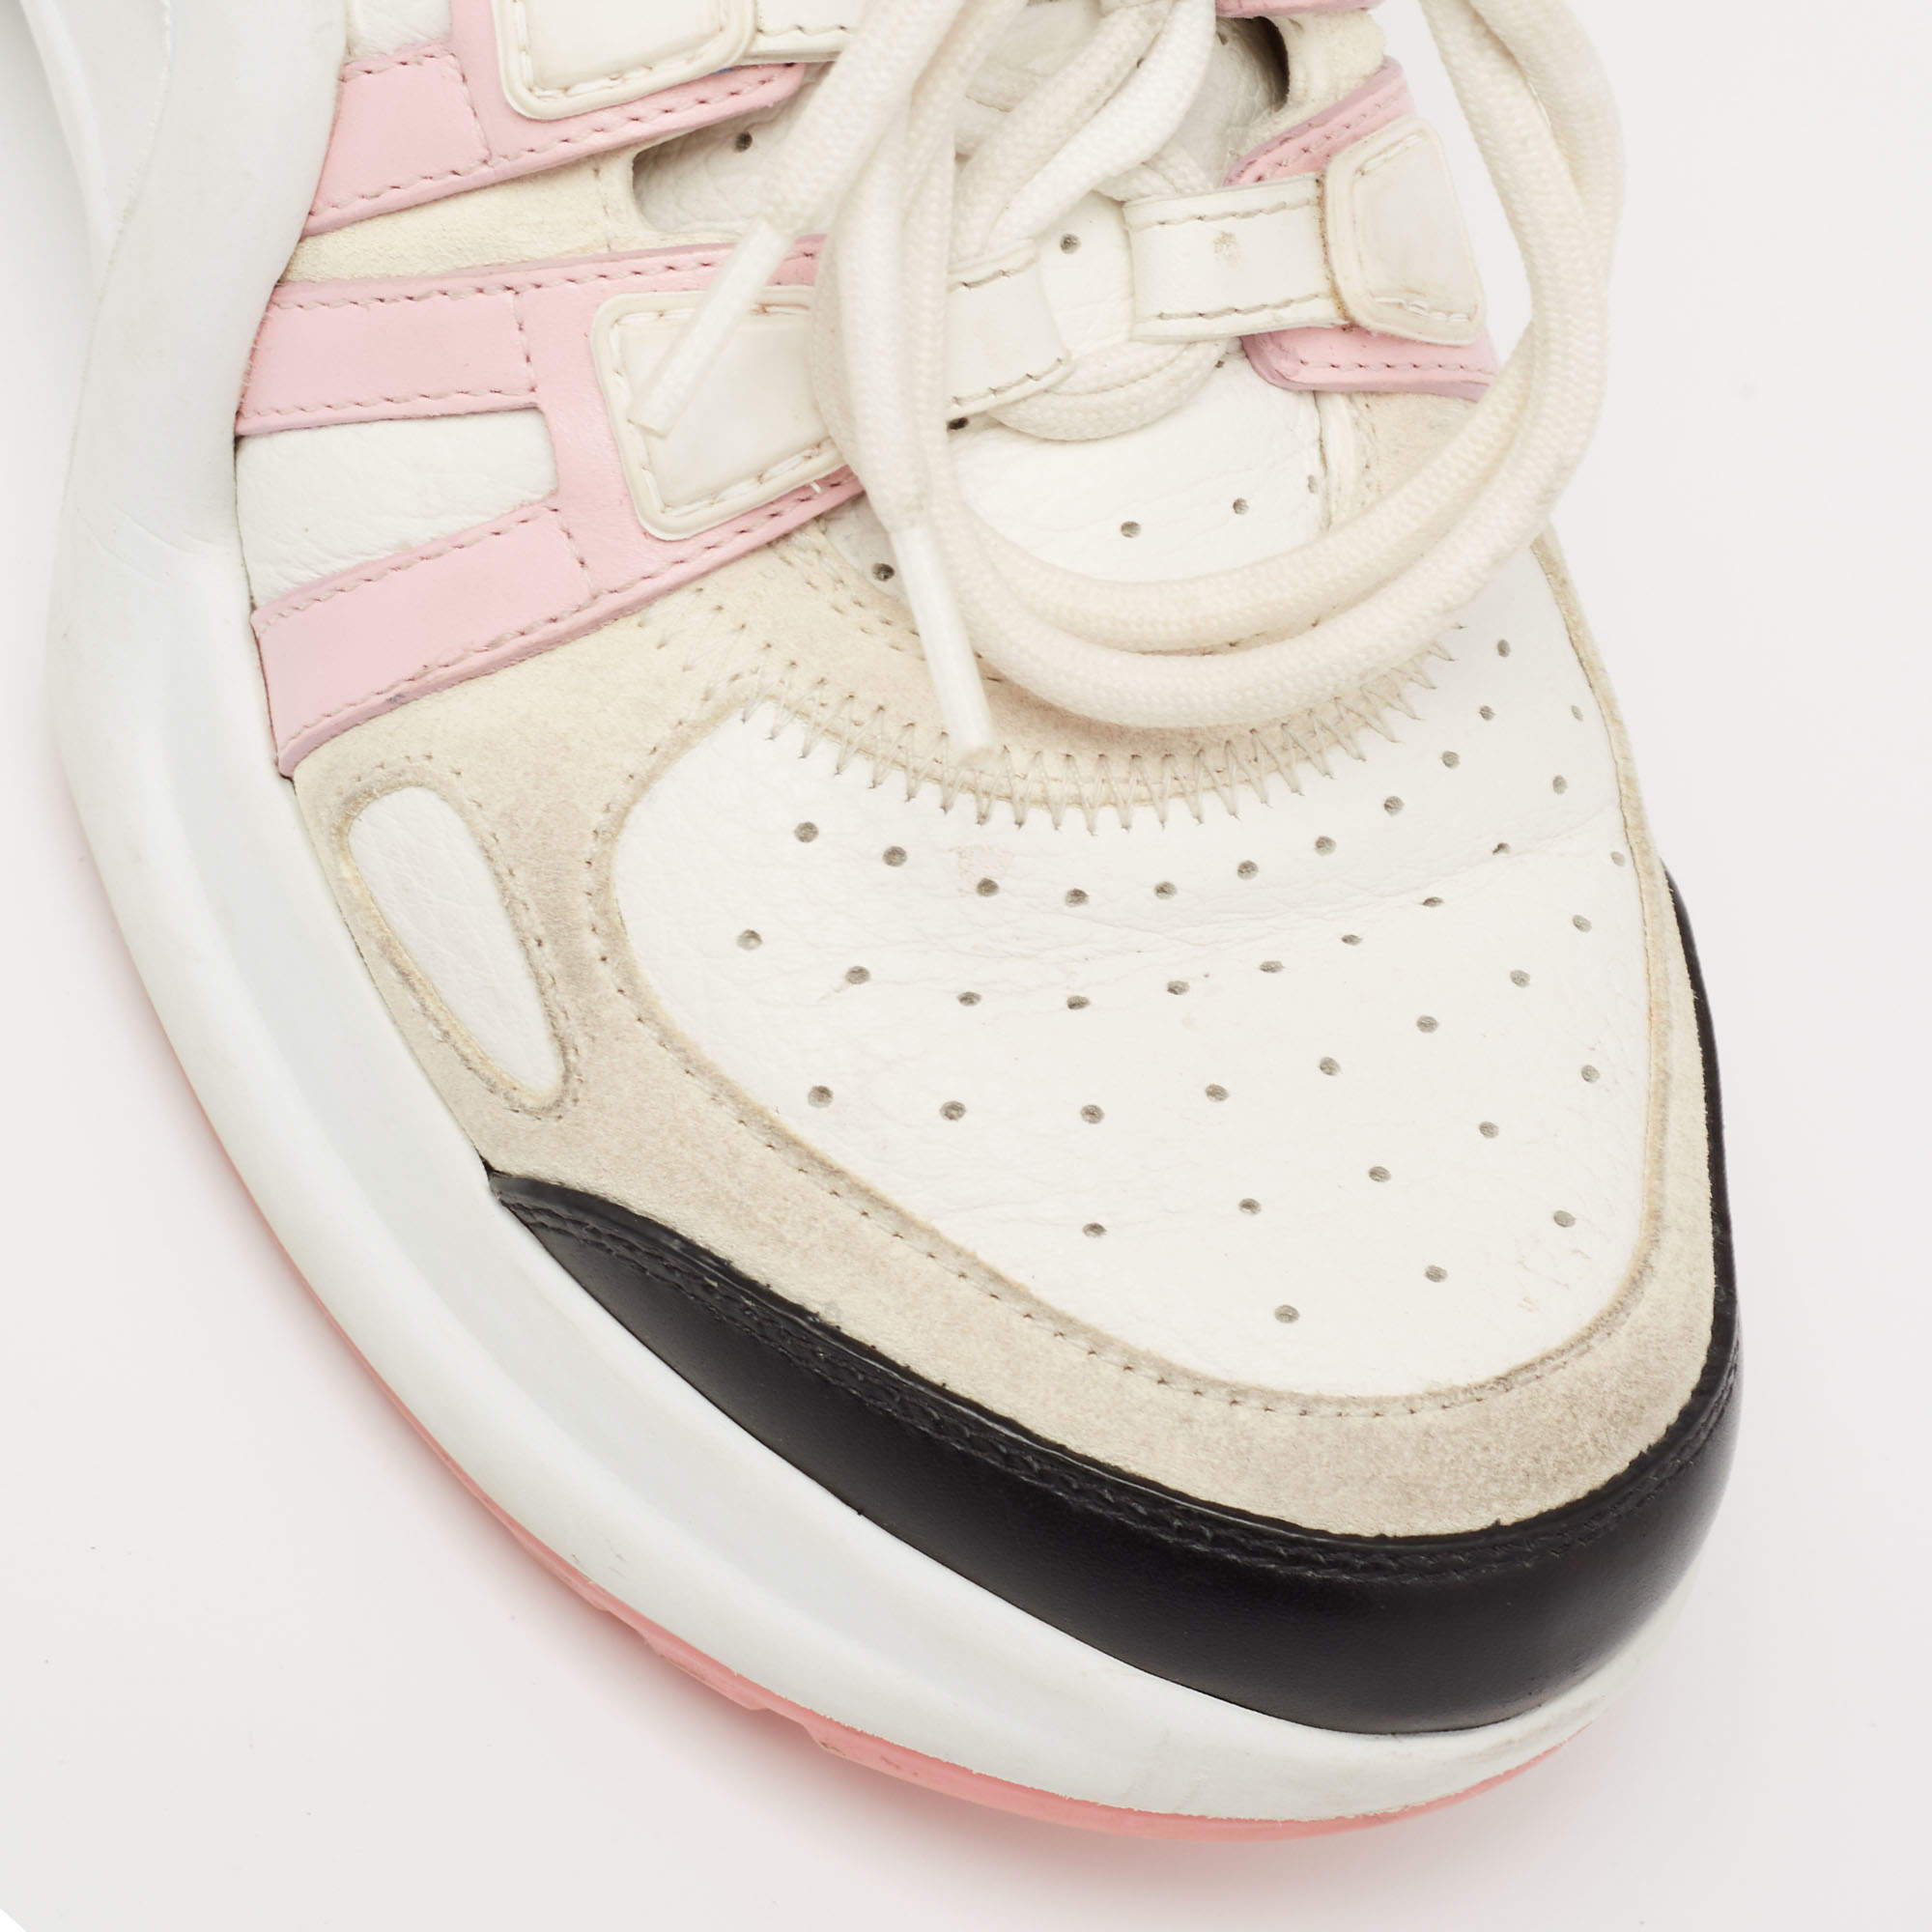 Louis Vuitton Multicolor Suede and Leather LV Archlight Sneakers